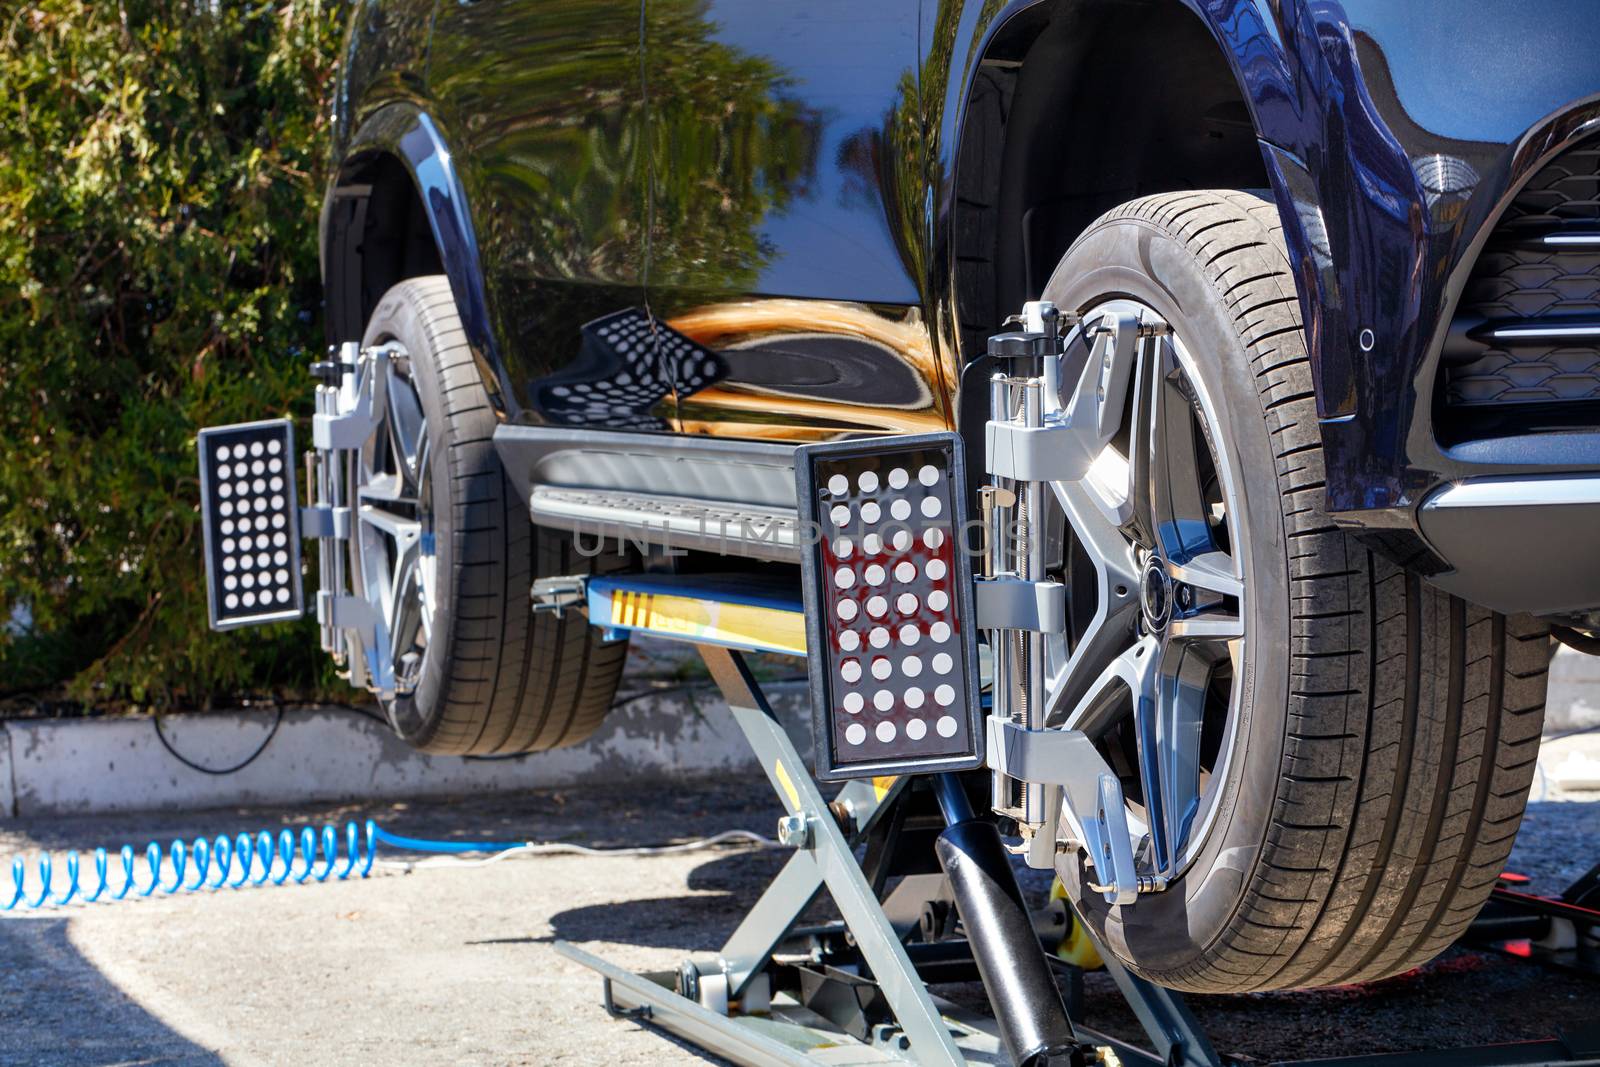 Equipment for aligning the wheels of a car on a mobile stand in a repair station. The car stands on a stand with wheel sensors for camber alignment.